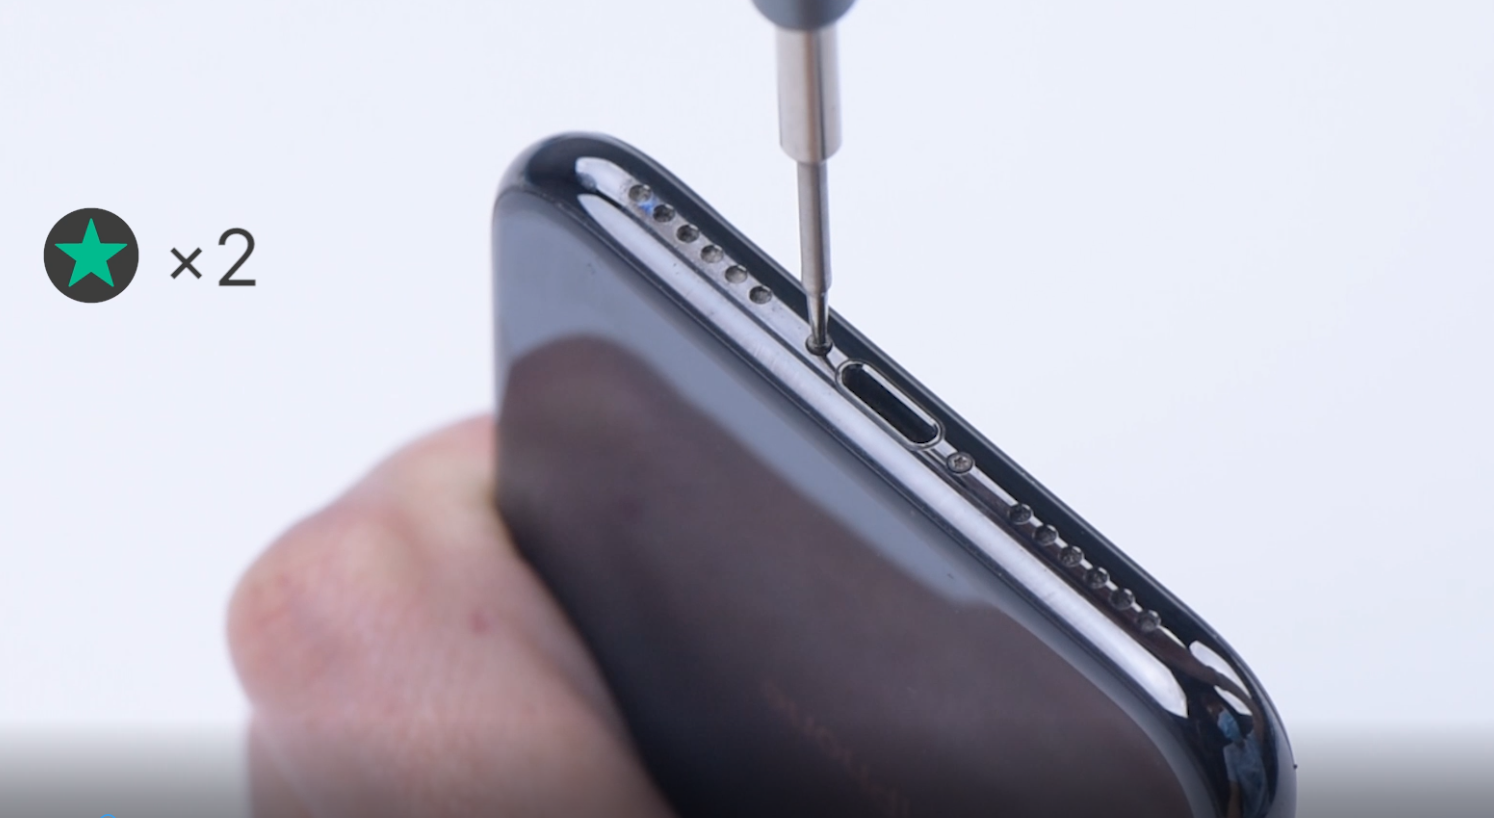 how to open iphone, how to replace iphonex battery